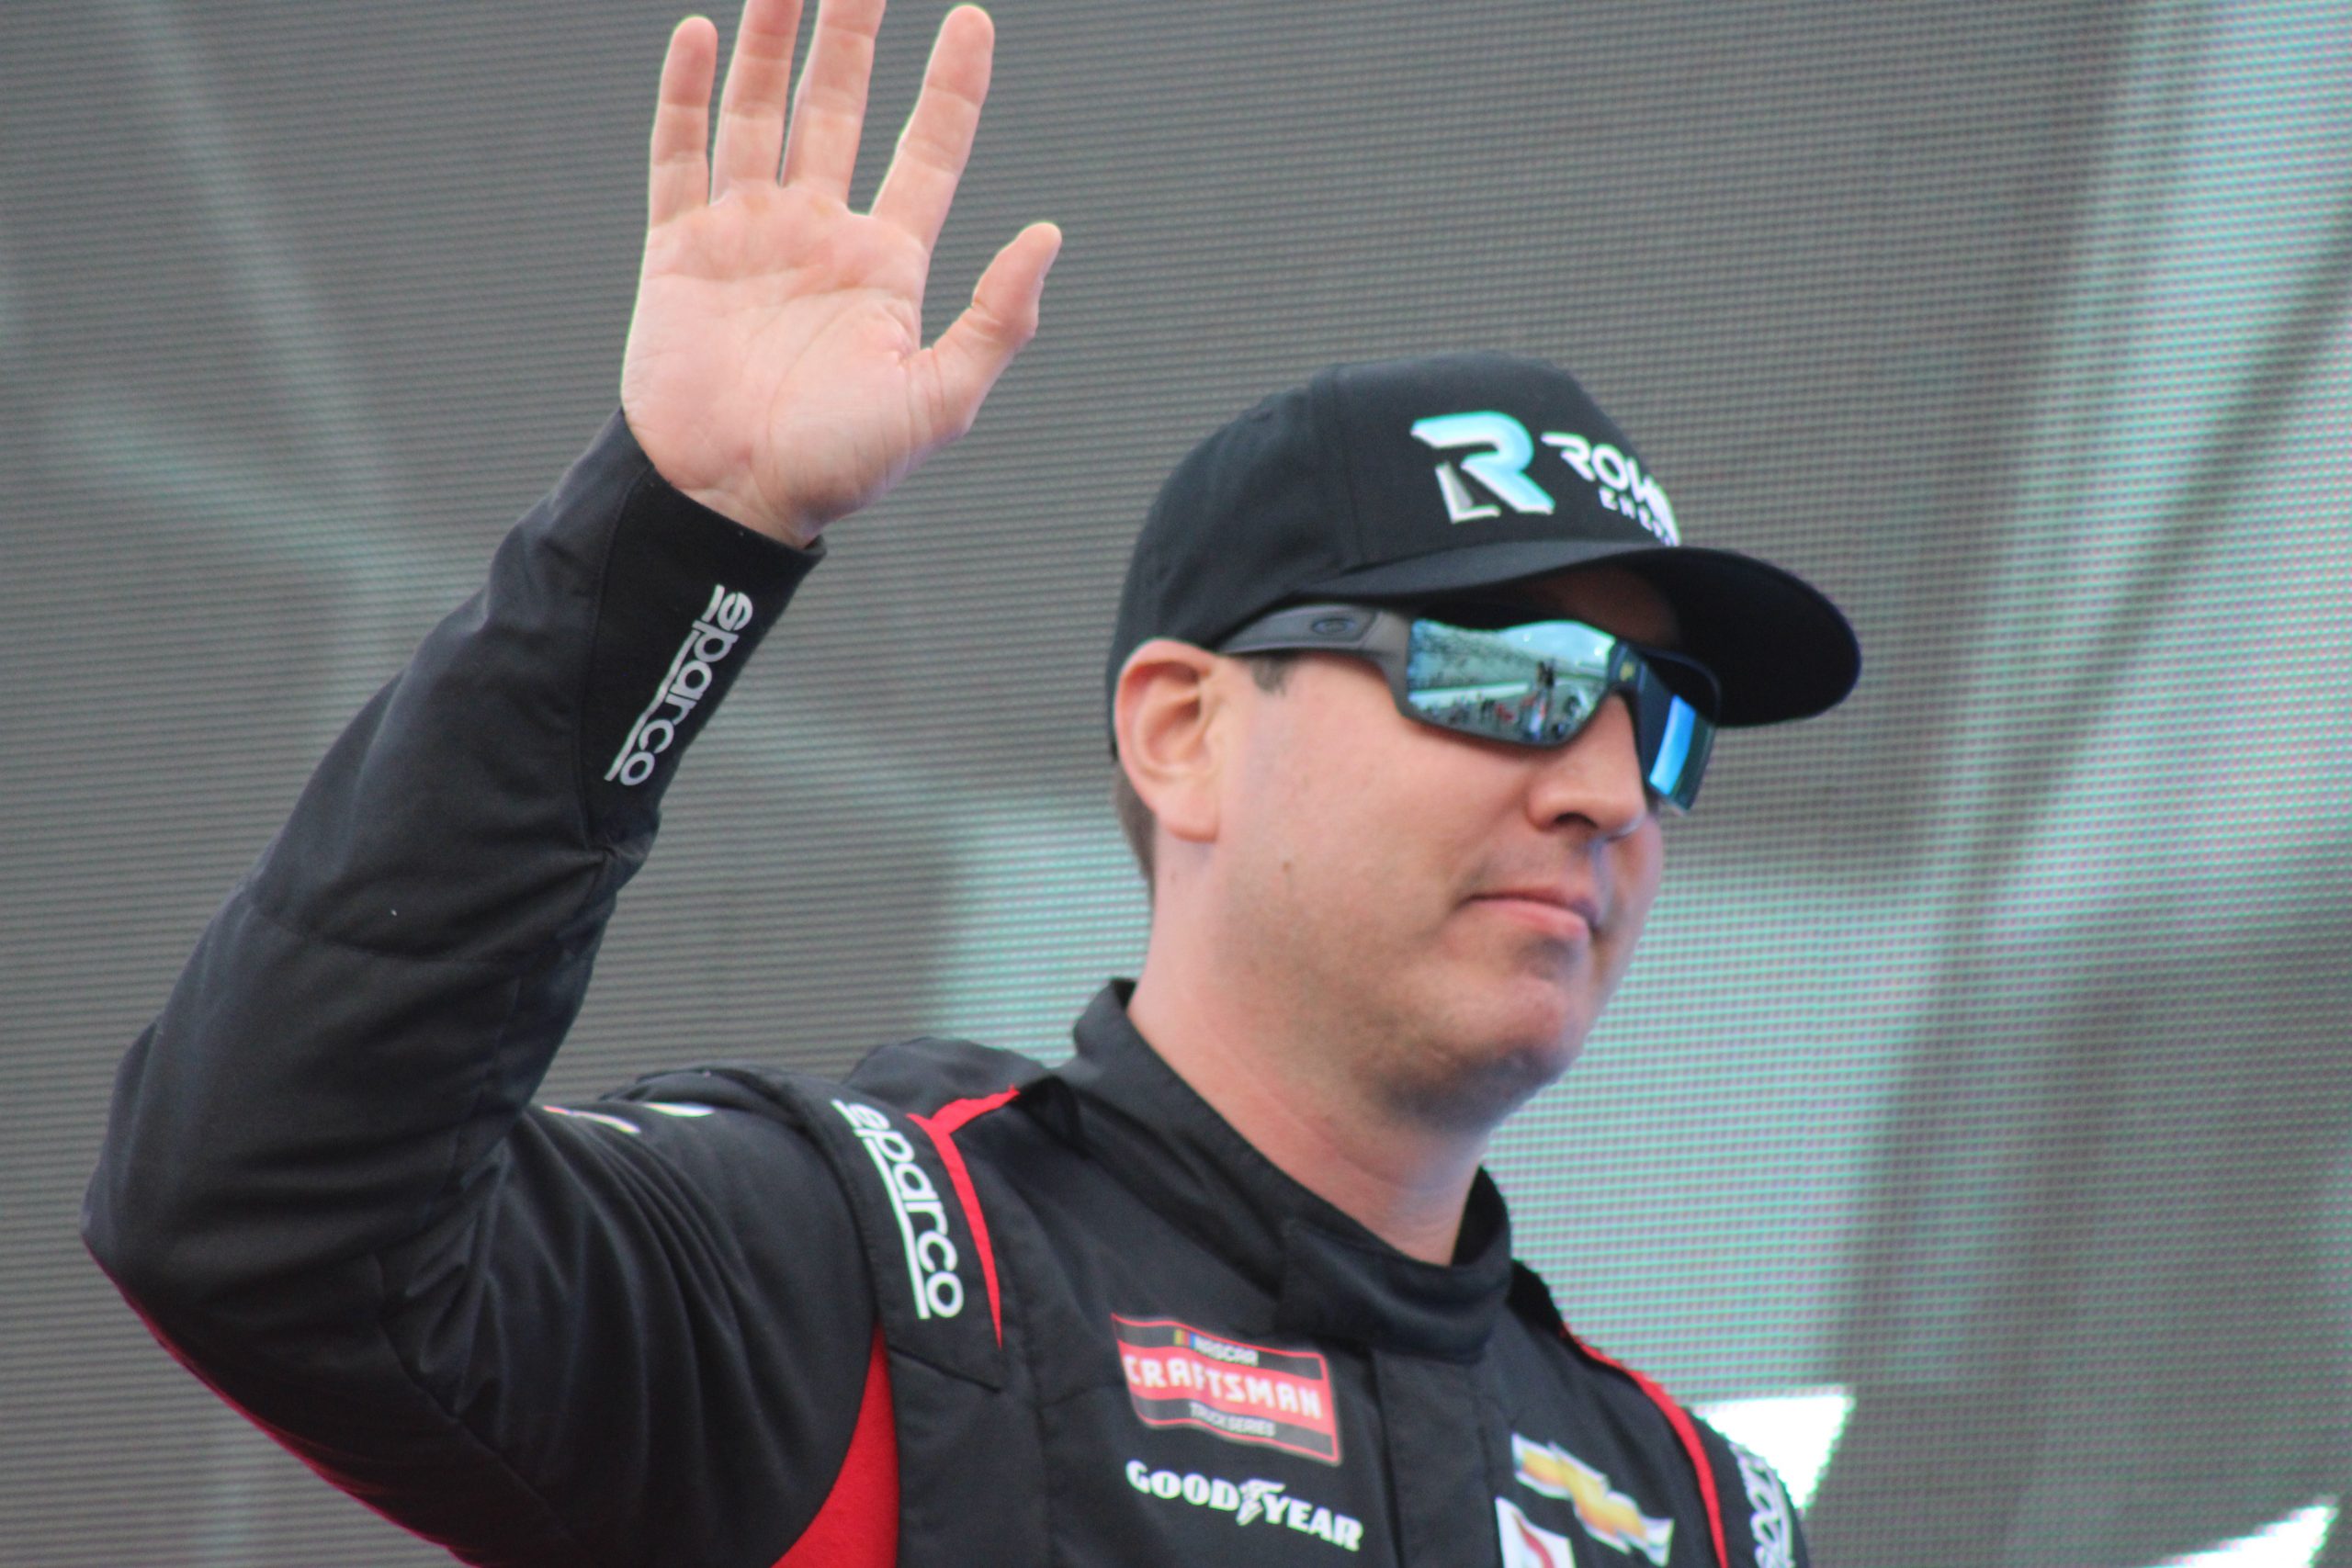 Kyle Busch said to wave your hands in the air like there are no repercussions. (Photo: Trish McCormack | The Podium Finish)